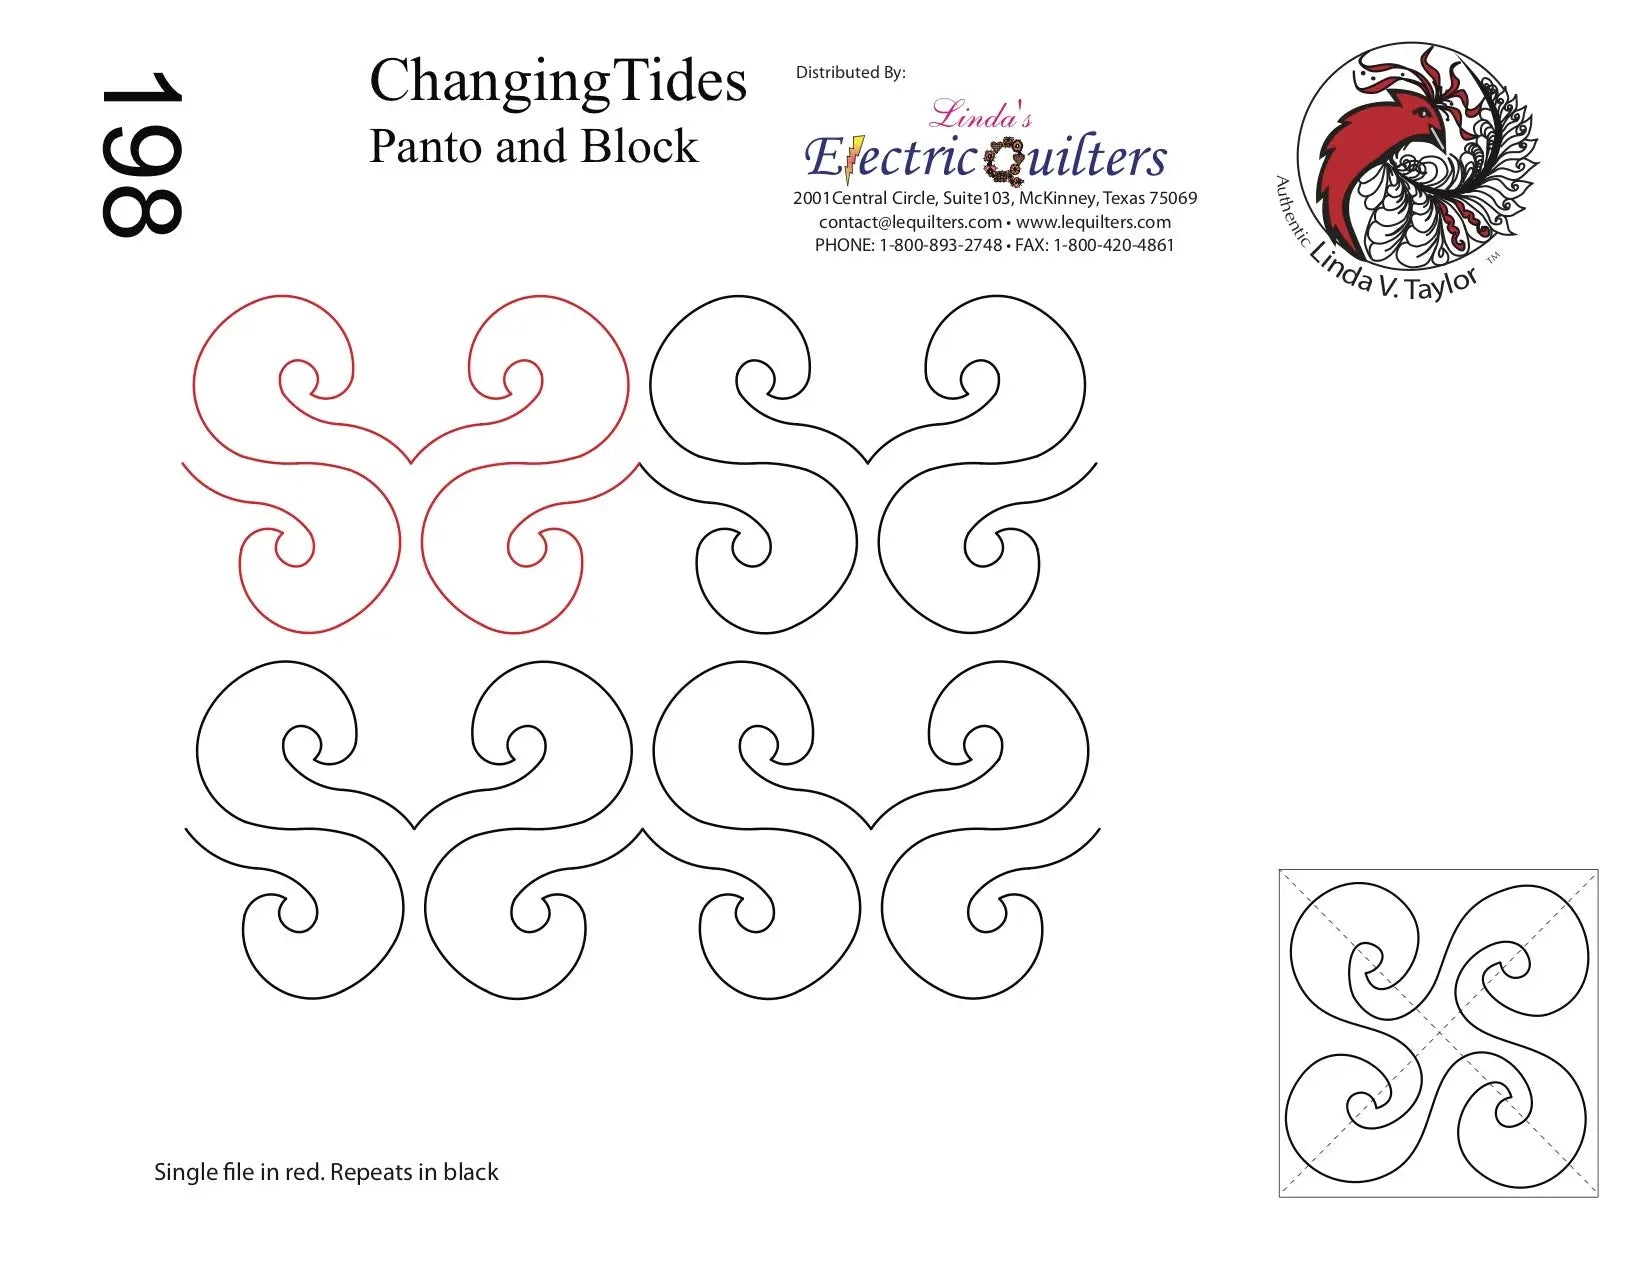 198 Changing Tides Pantograph with Blocks by Linda V. Taylor - Linda's Electric Quilters